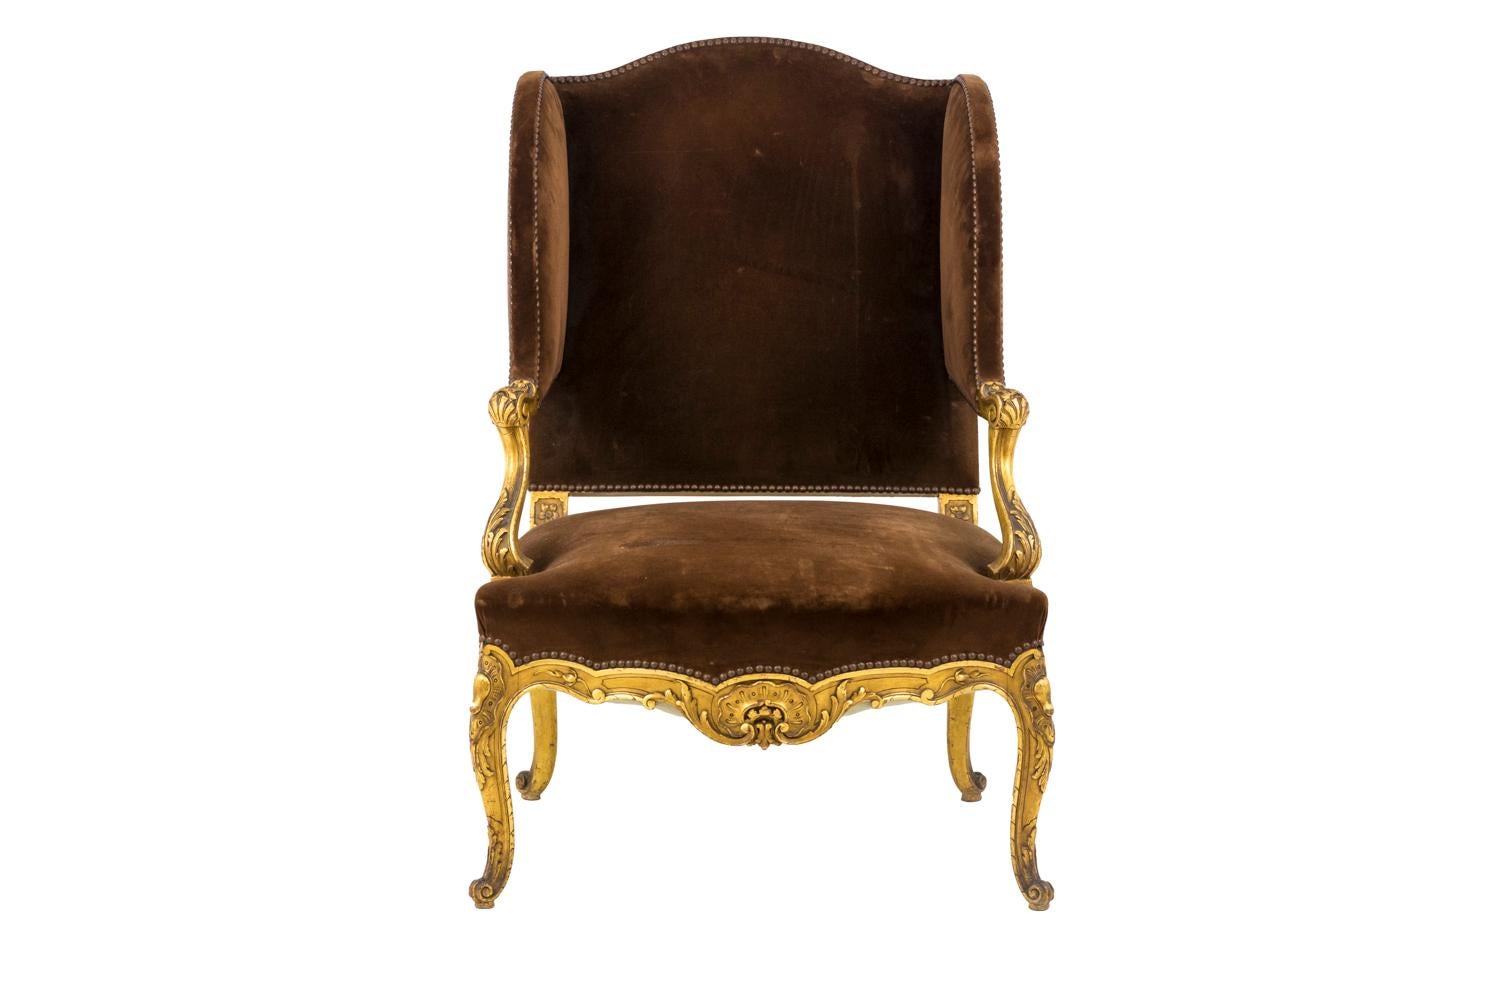 Louis XV style wing chair in giltwood standing on four cabriole legs ending by volute shaped acanthus leaves adorned with a foliage rocaille cartouche.
Scalloped apron centred by a c-crest and decorated with acanthus leaves and scrolls.
Arm